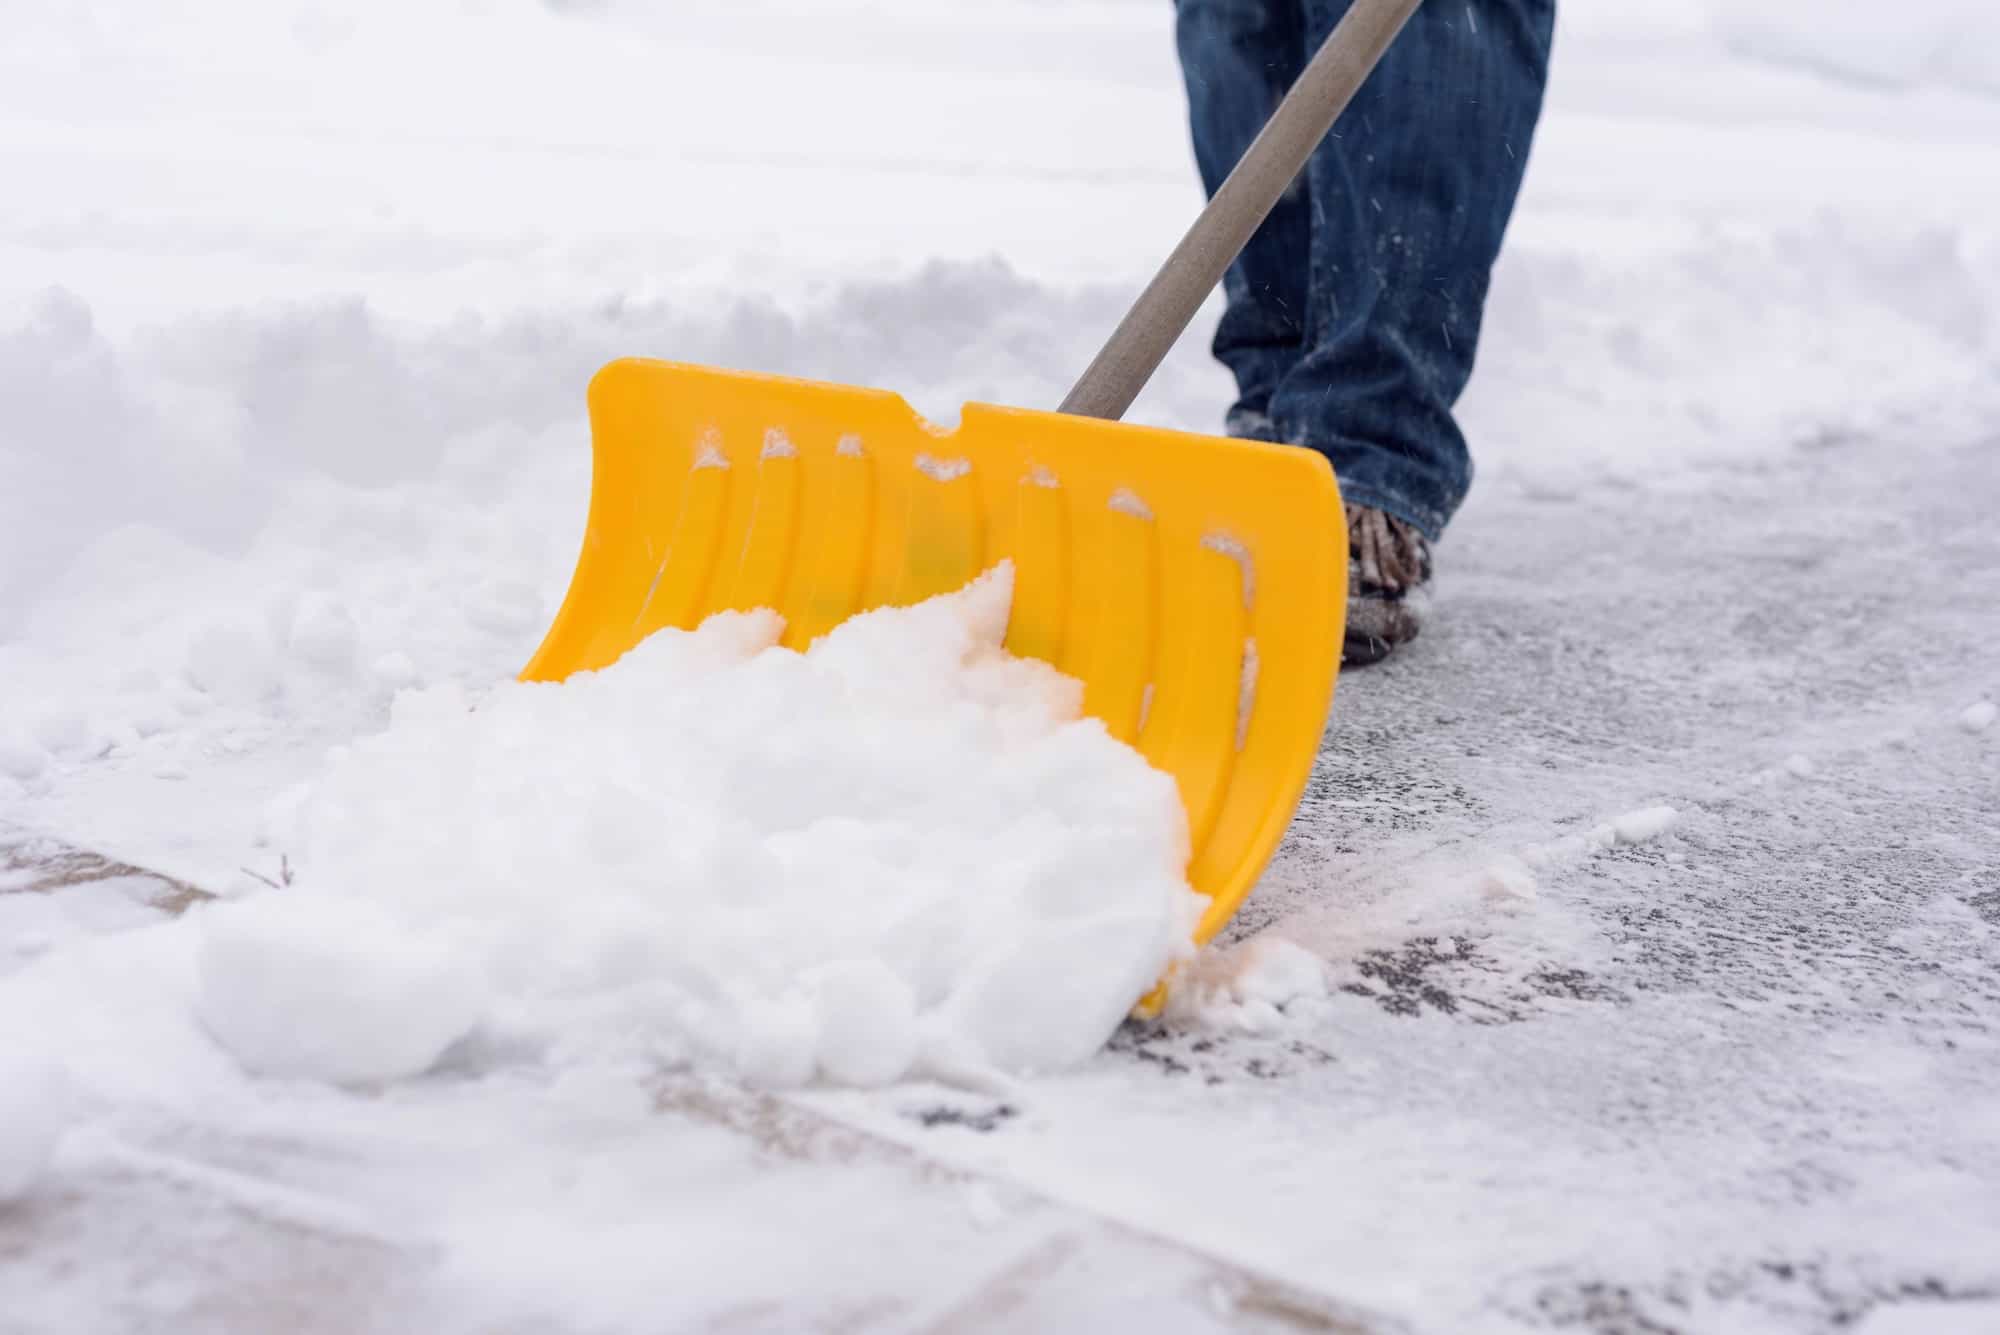 Shoveling snow in winter Commerical snow removal company Boulder Creek Group